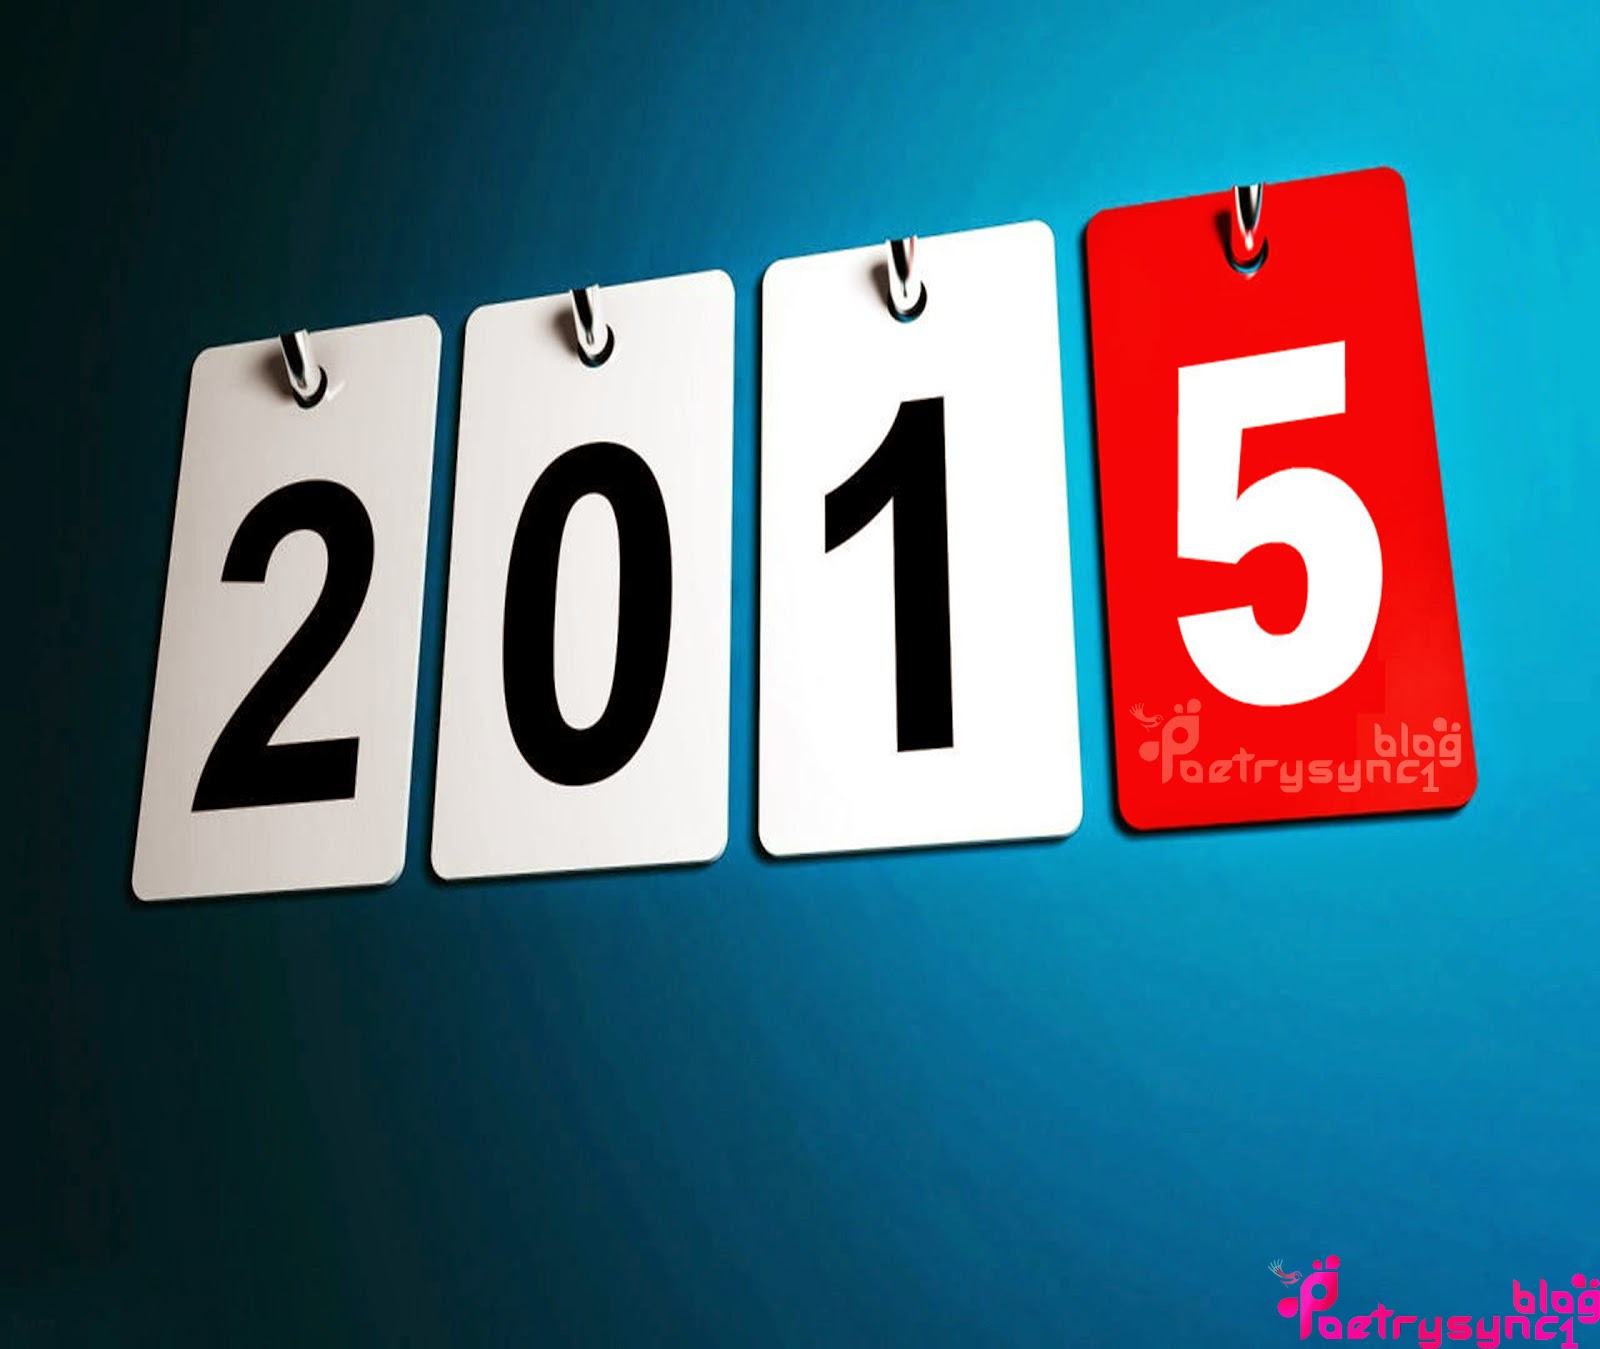 happy new year wishes image 2015 greeting wide